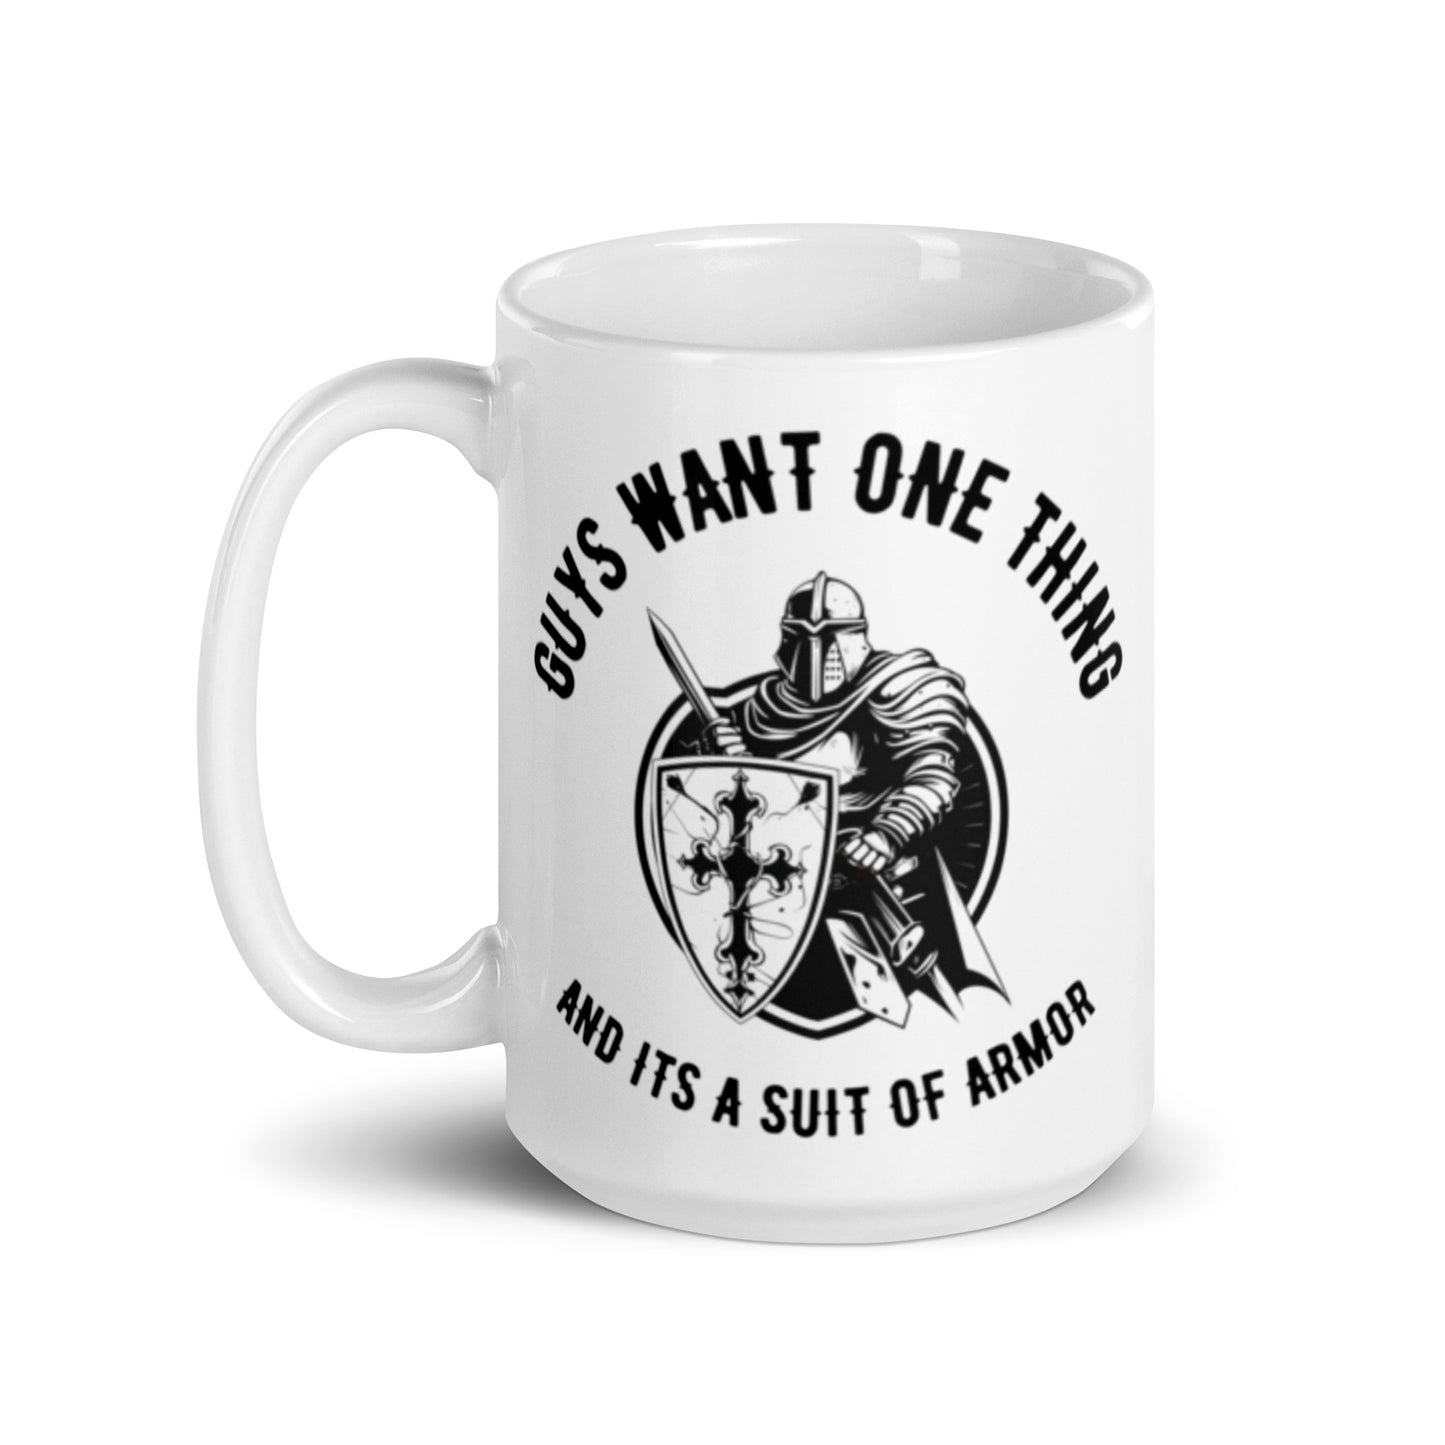 Guys Want One Thing, Suit of Armor Mug